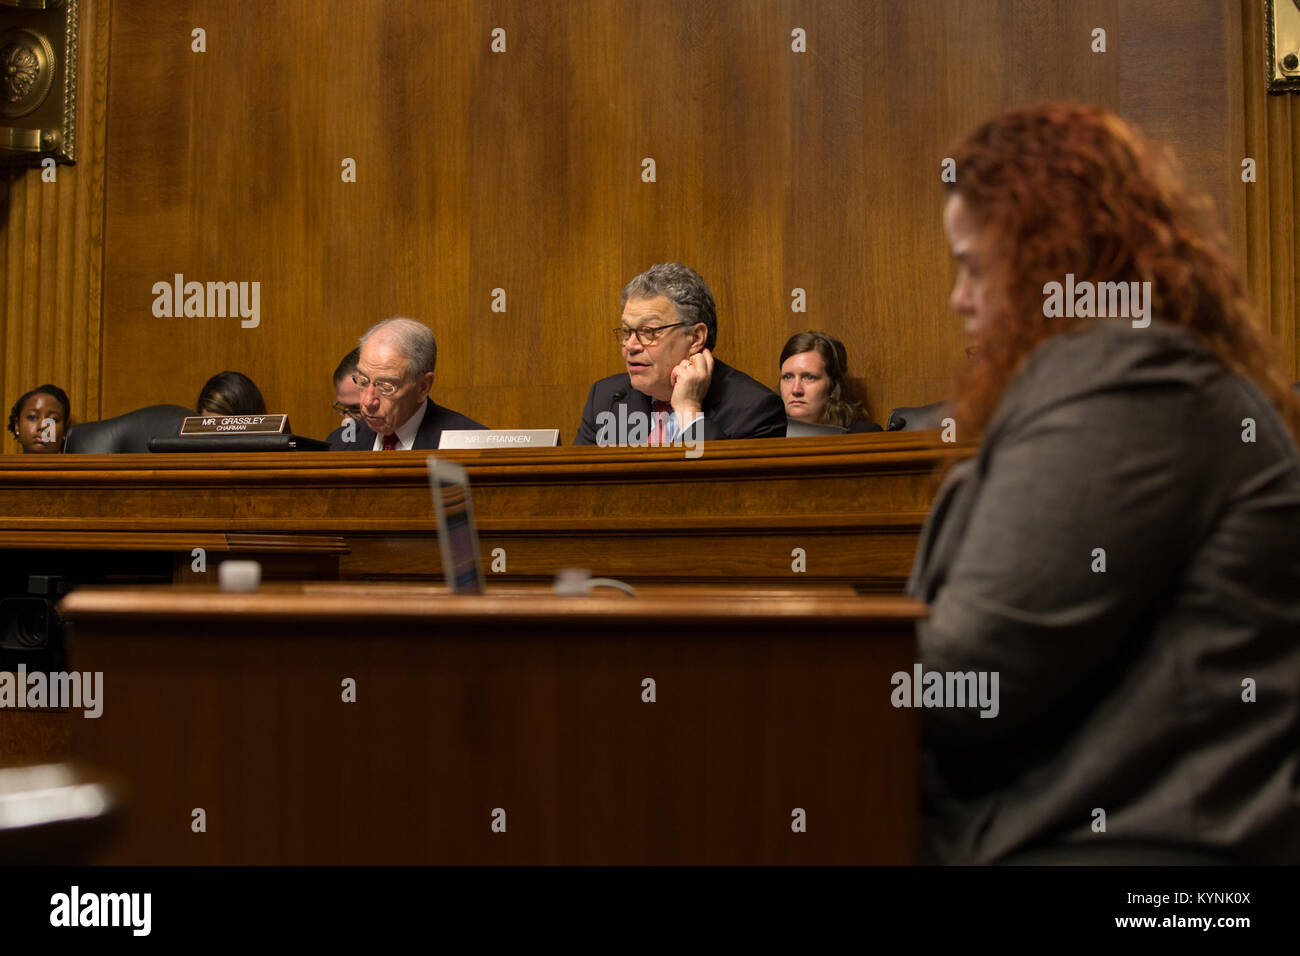 U.S. Customs and Border Protection, USBP Acting Chief Carla Provost testified before the Judiciary Committee hearing on the subject &quot;The MS-13 Problem: Investigating Gang Membership, its Nexus to Illegal Immigration, and Federal Efforts to End the Threat&quot; at the Dirksen Senate Office Building. Seen here Senator Franken provides remarks and asks questions.  Photographer: Donna Burton Stock Photo